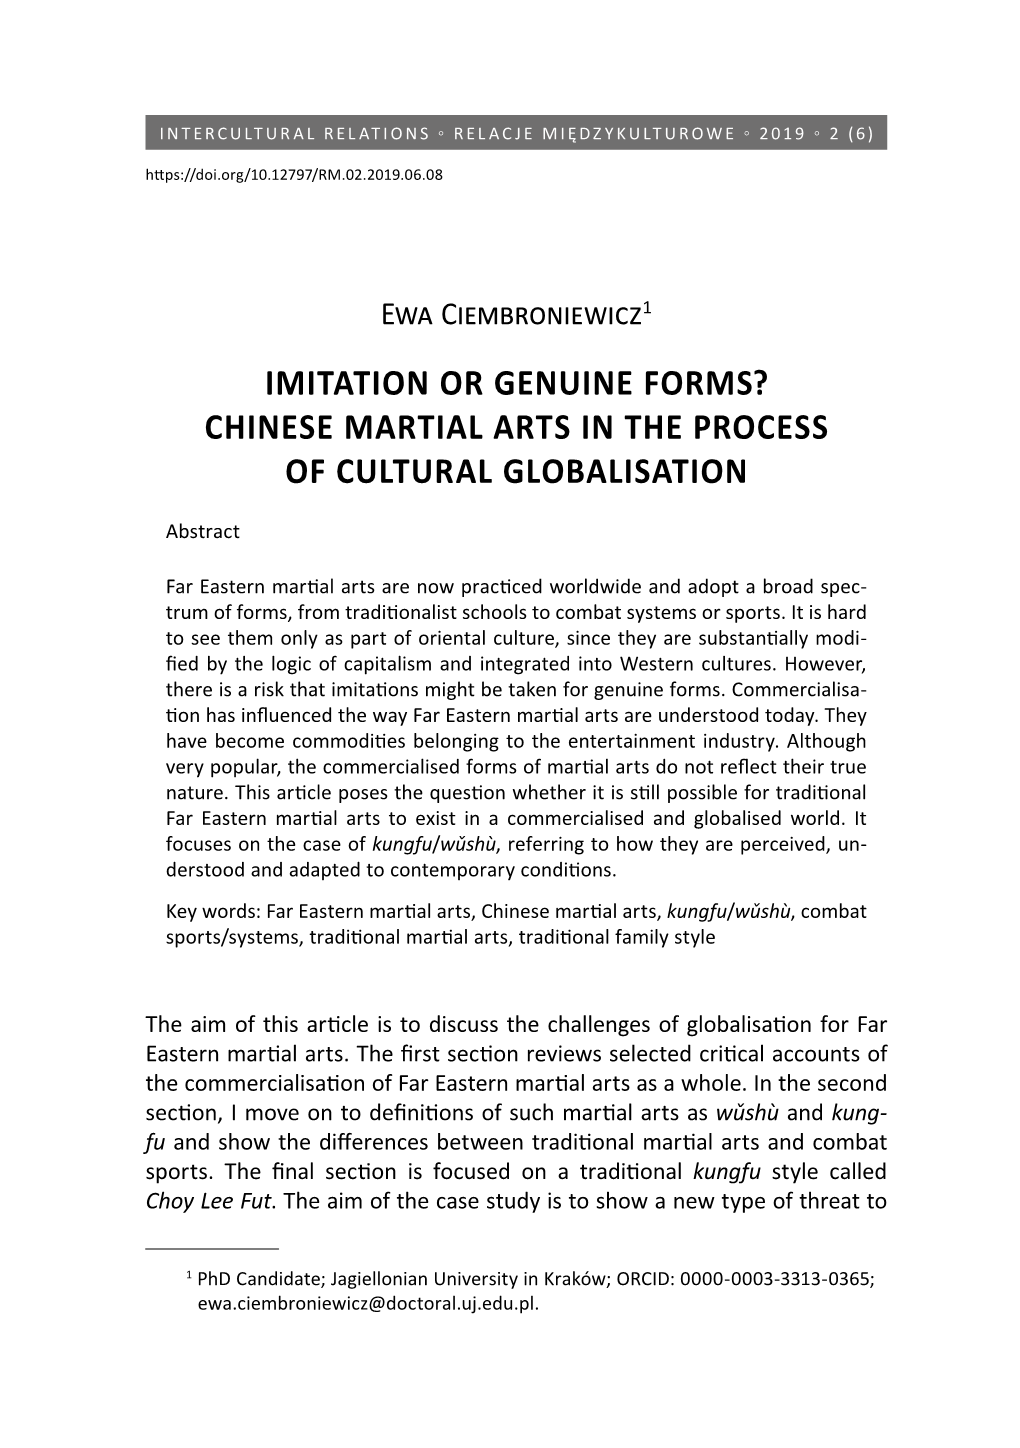 Imitation Or Genuine Forms? Chinese Martial Arts in the Process of Cultural Globalisation